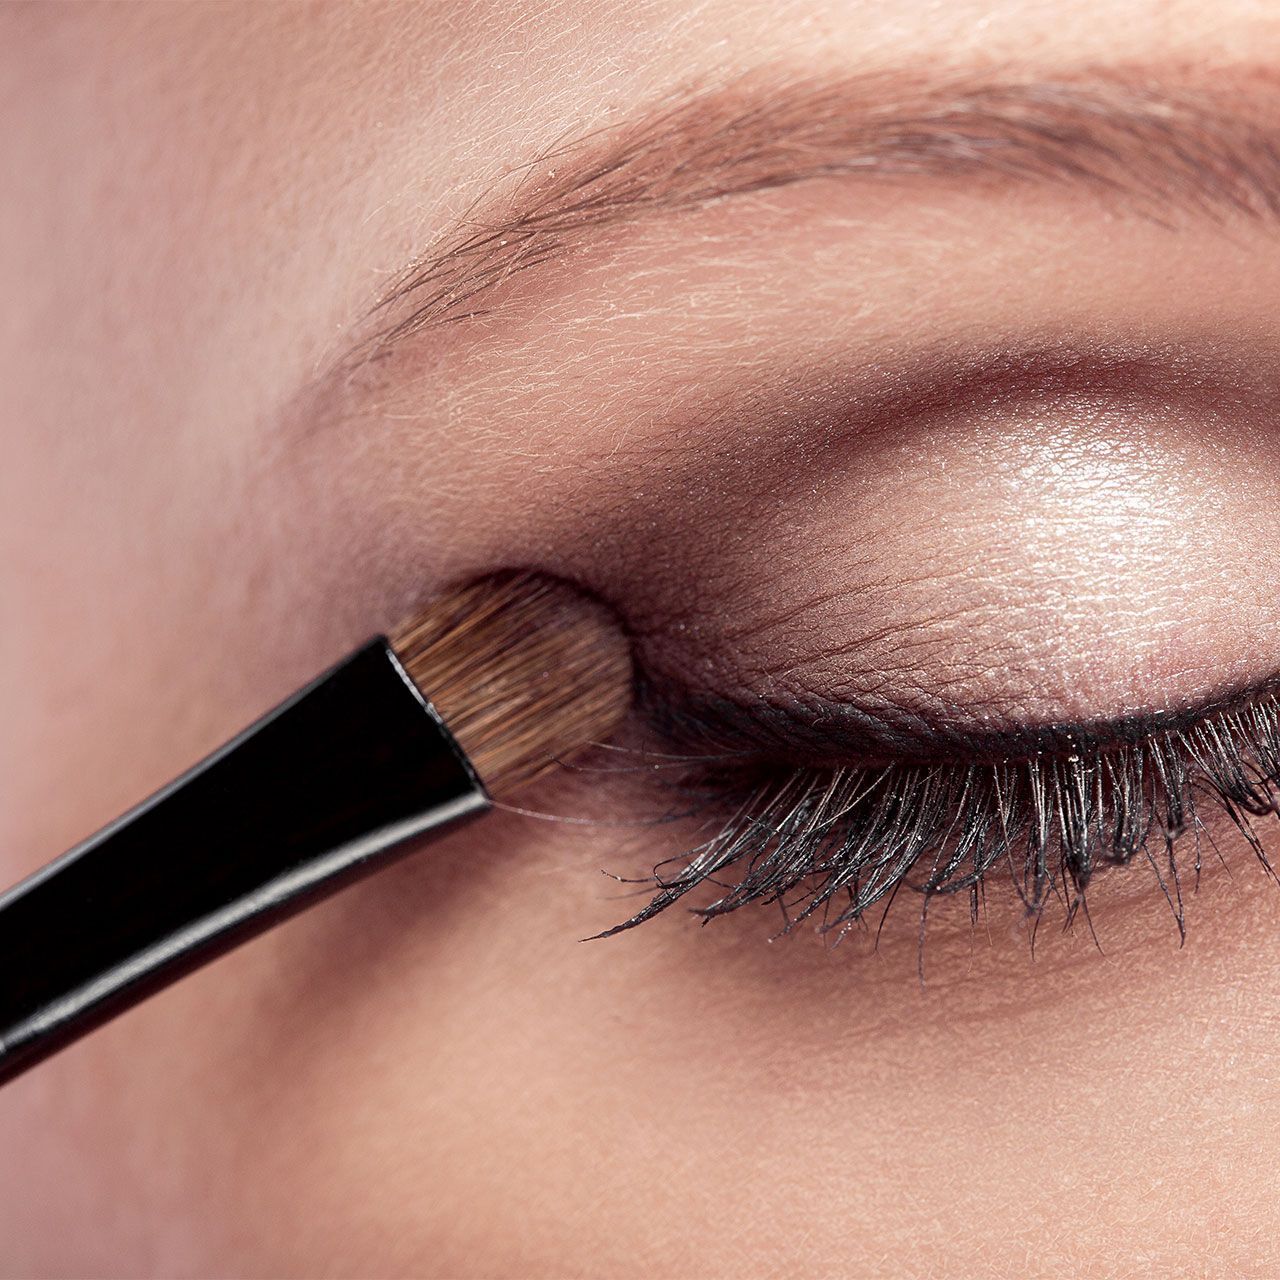 How to do eye makeup after 50: tips from professionals